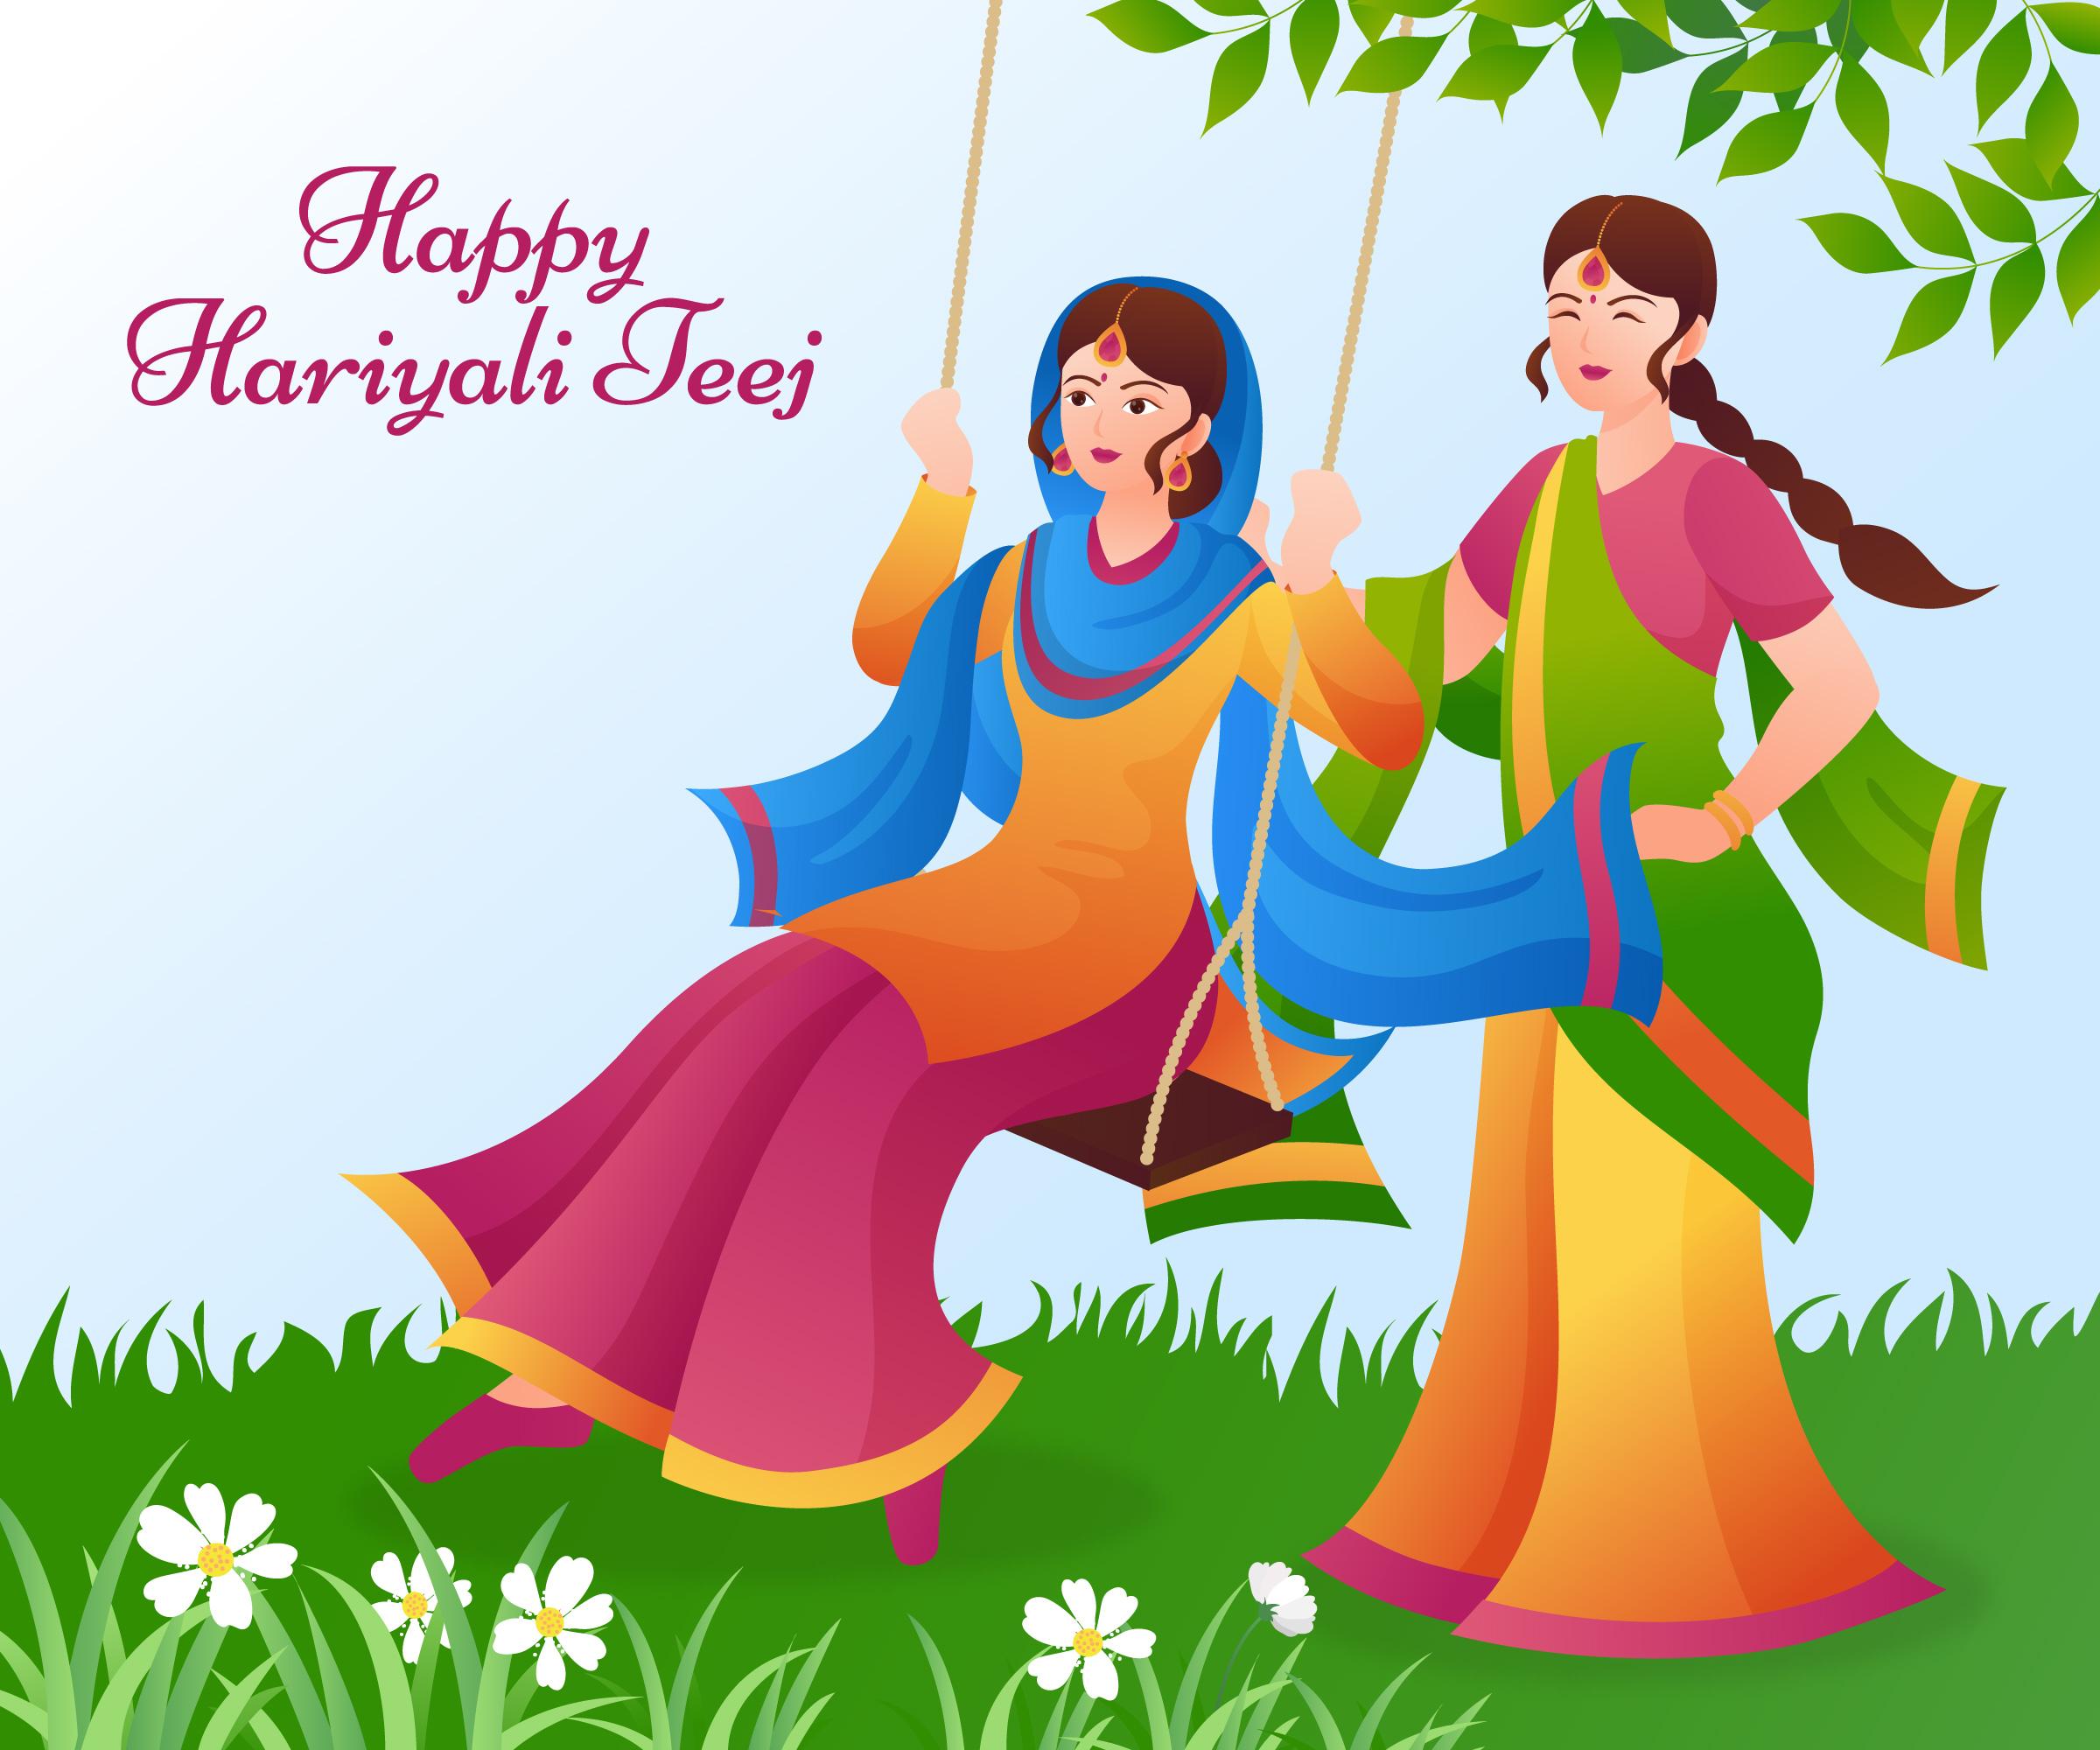 Hariyali Teej 2022: Quotes, Wishes, Messages, Greetings, Images To Share